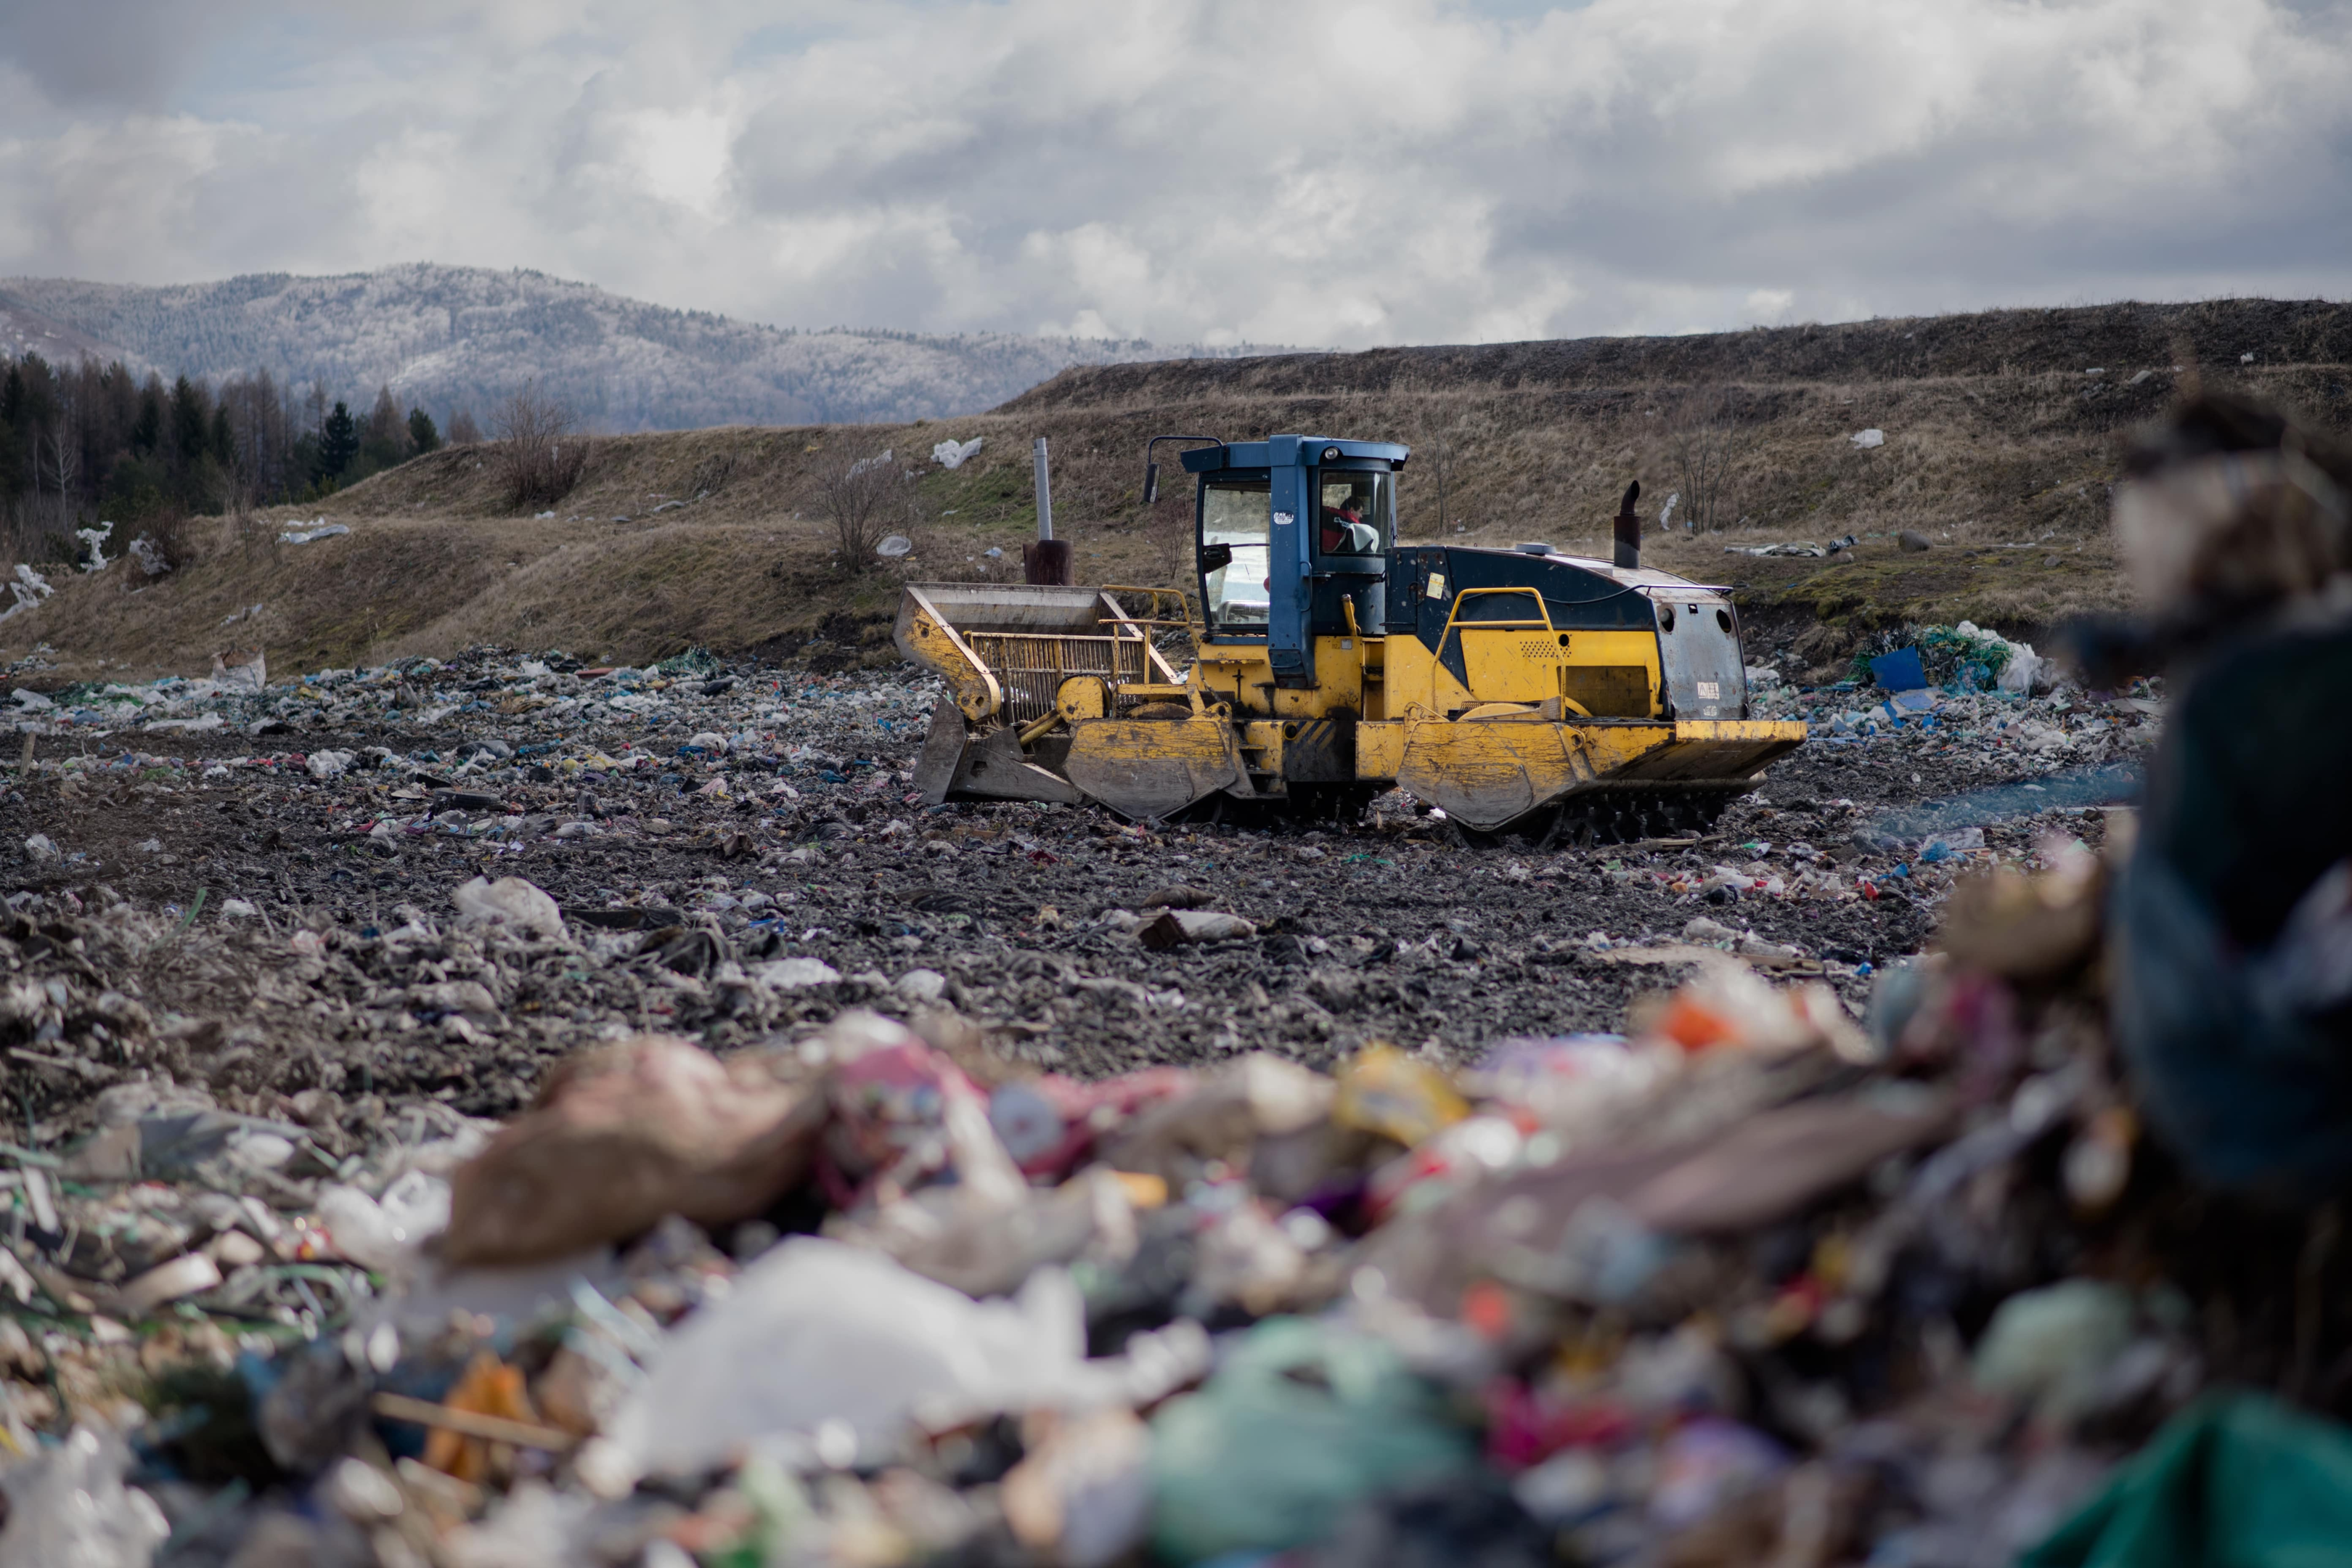 Household waste being processed at landfill site